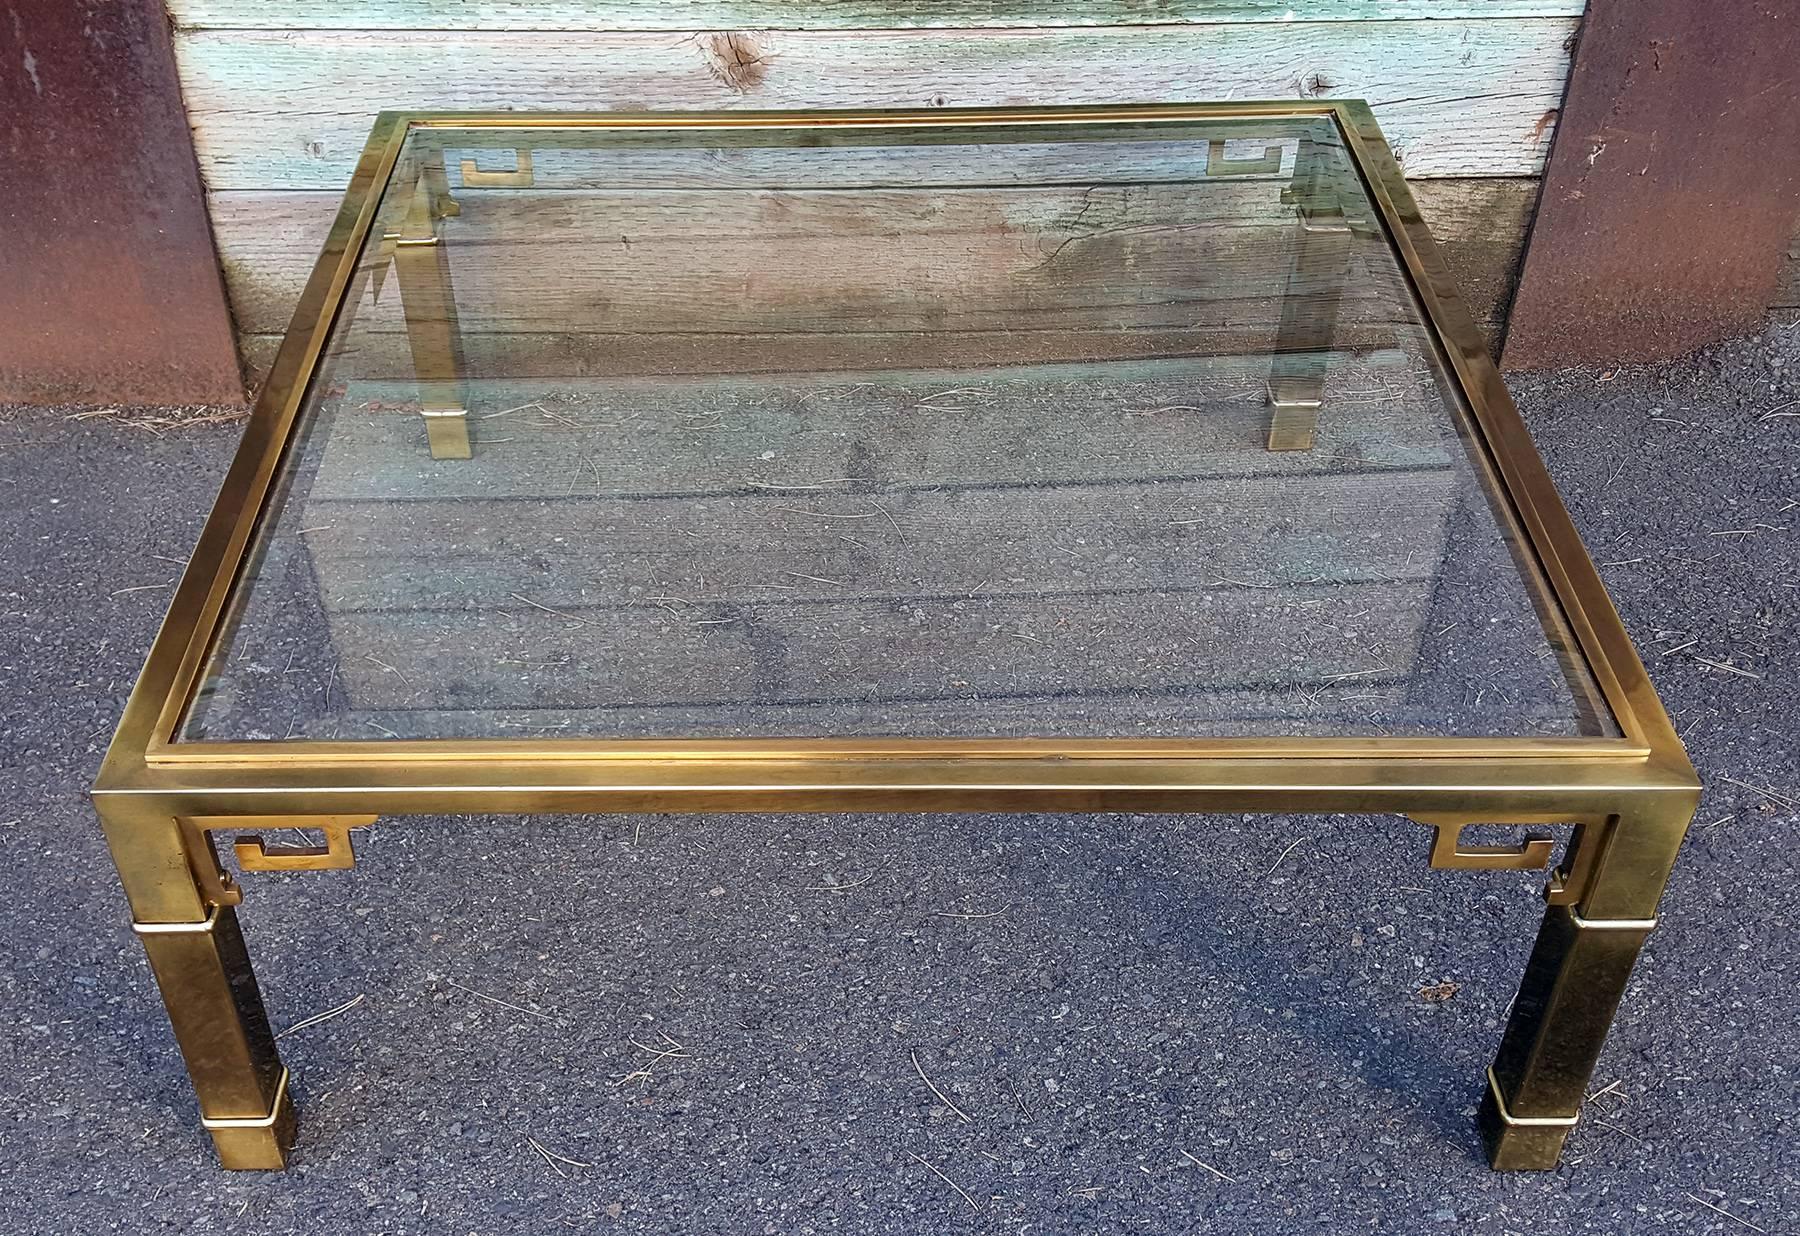 A striking brass coffee table designed by Mastercraft. This brass coffee table embodies the Regency / Hollywood Regency style with a polished contemporary look. The table features a beveled glass top and has a wonderful patina to commensurate with